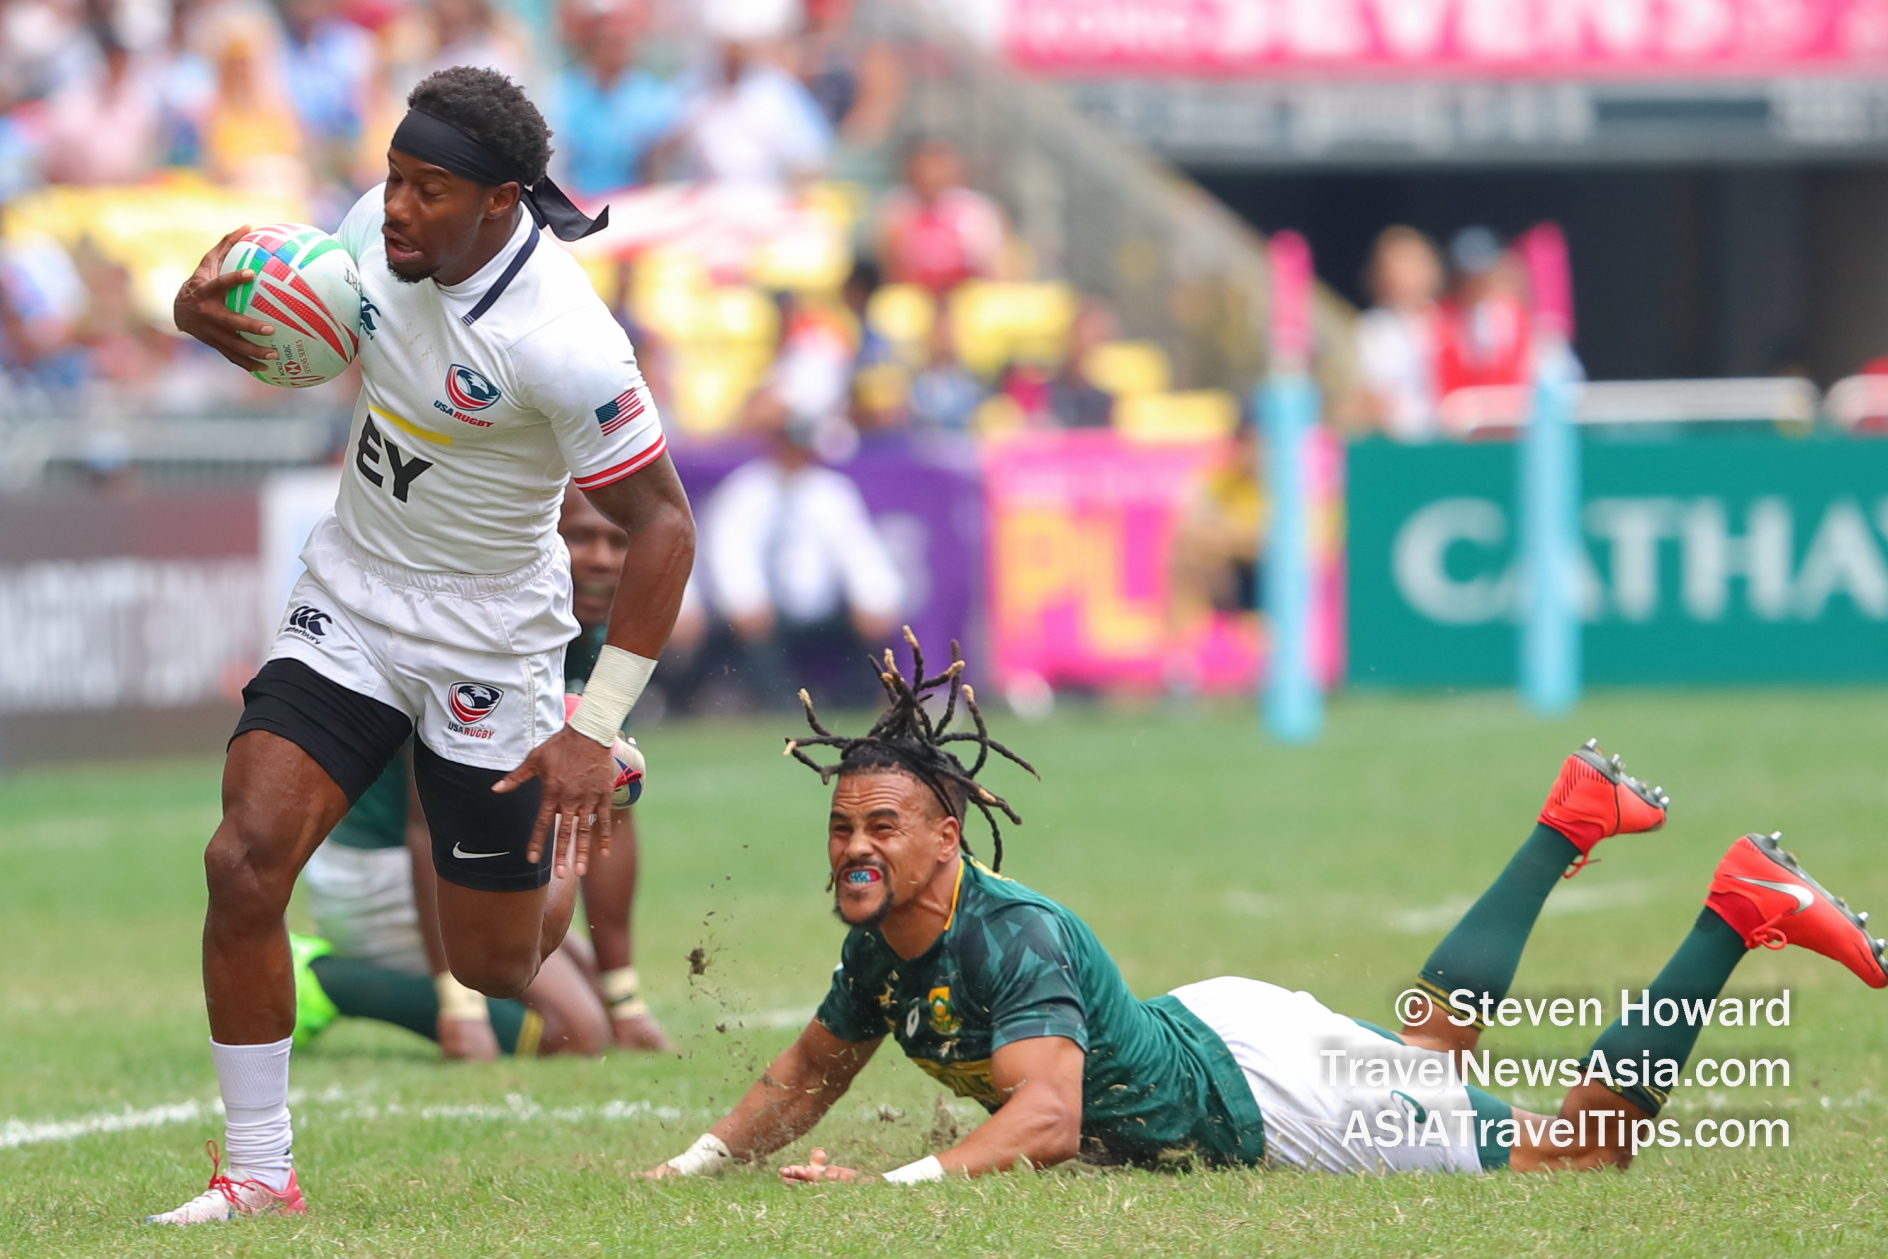 Action from USA v South Africa at HK7s 2019. Picture by Steven Howard of TravelNewsAsia.com Click to enlarge.